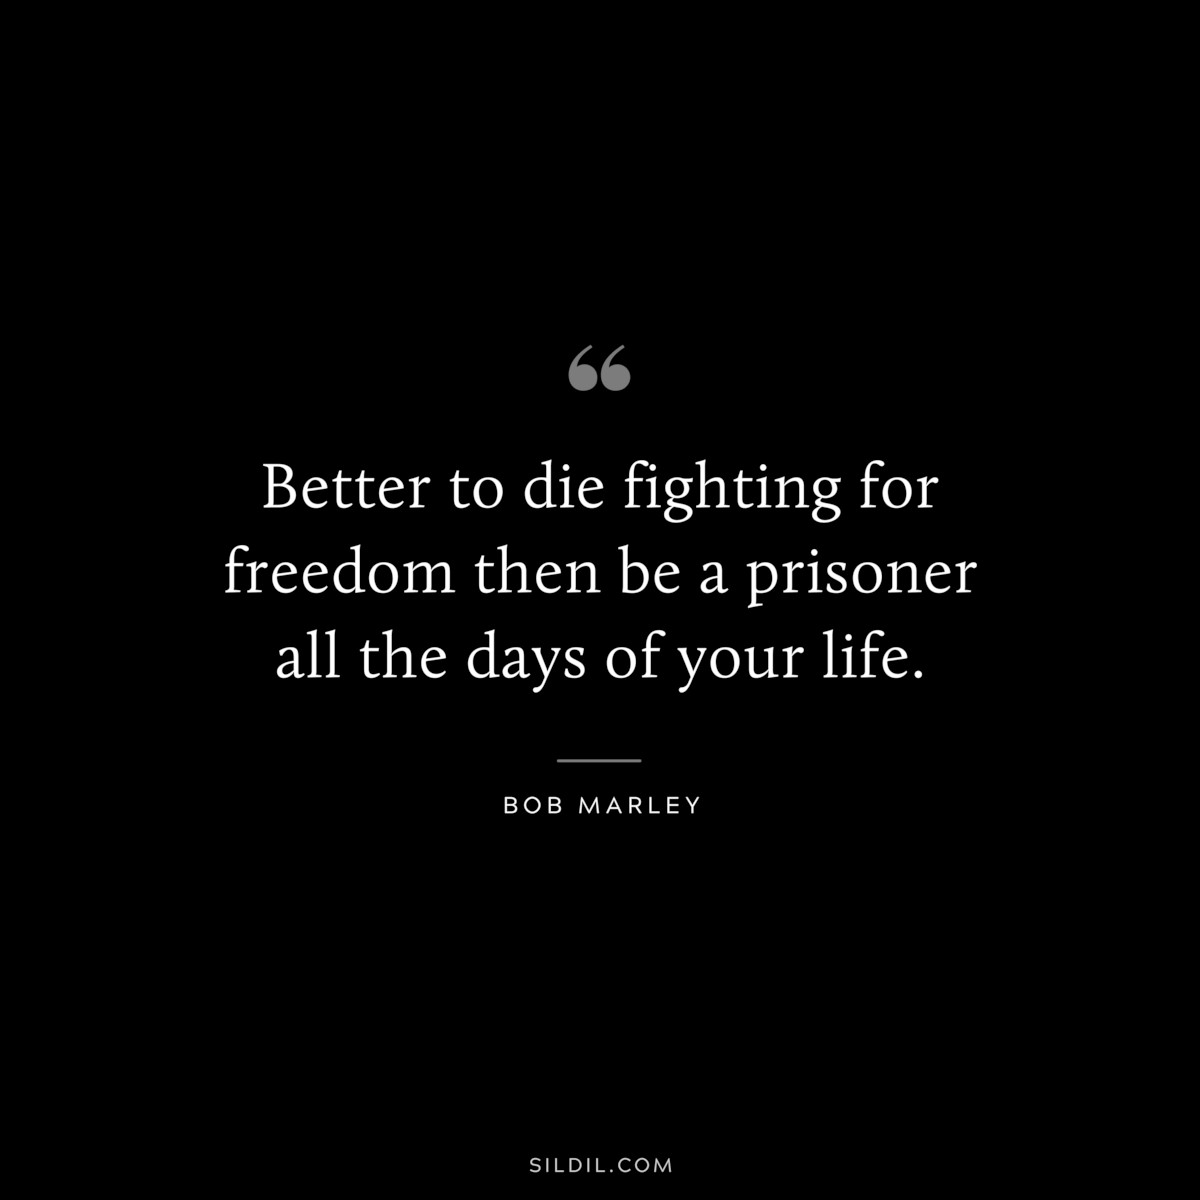 Better to die fighting for freedom then be a prisoner all the days of your life. ― Bob Marley